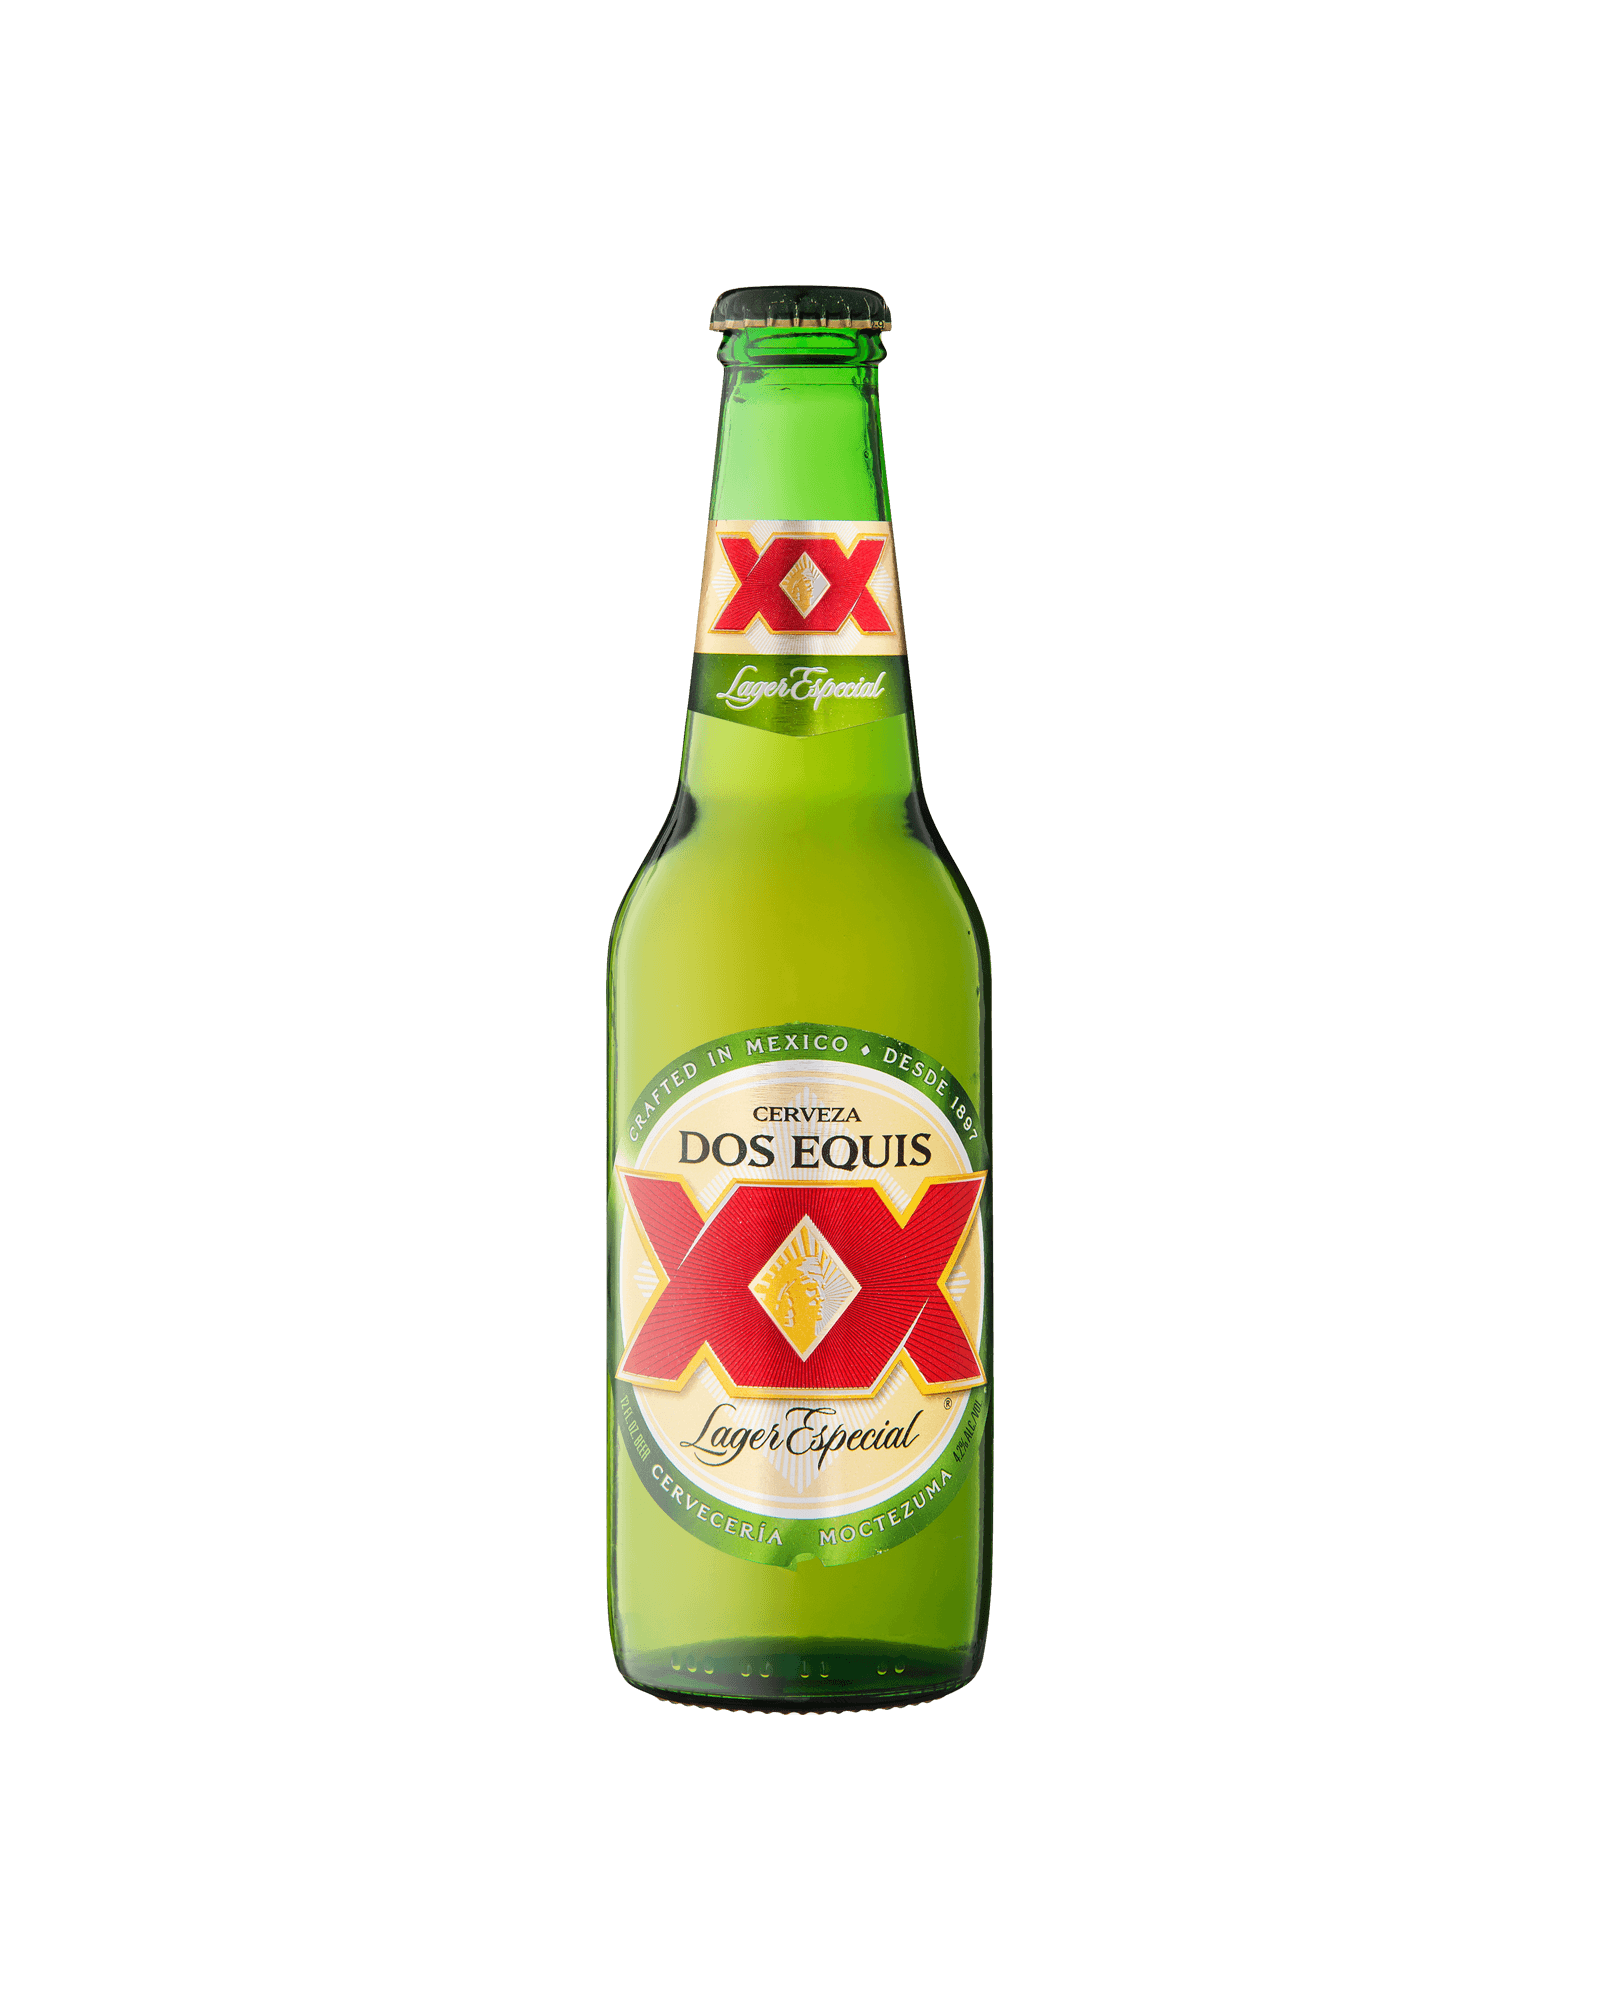 Dos Equis Lager Especial Logo - Dos Equis Lager Especial 355mL. Dan Murphy's. Buy Wine, Champagne